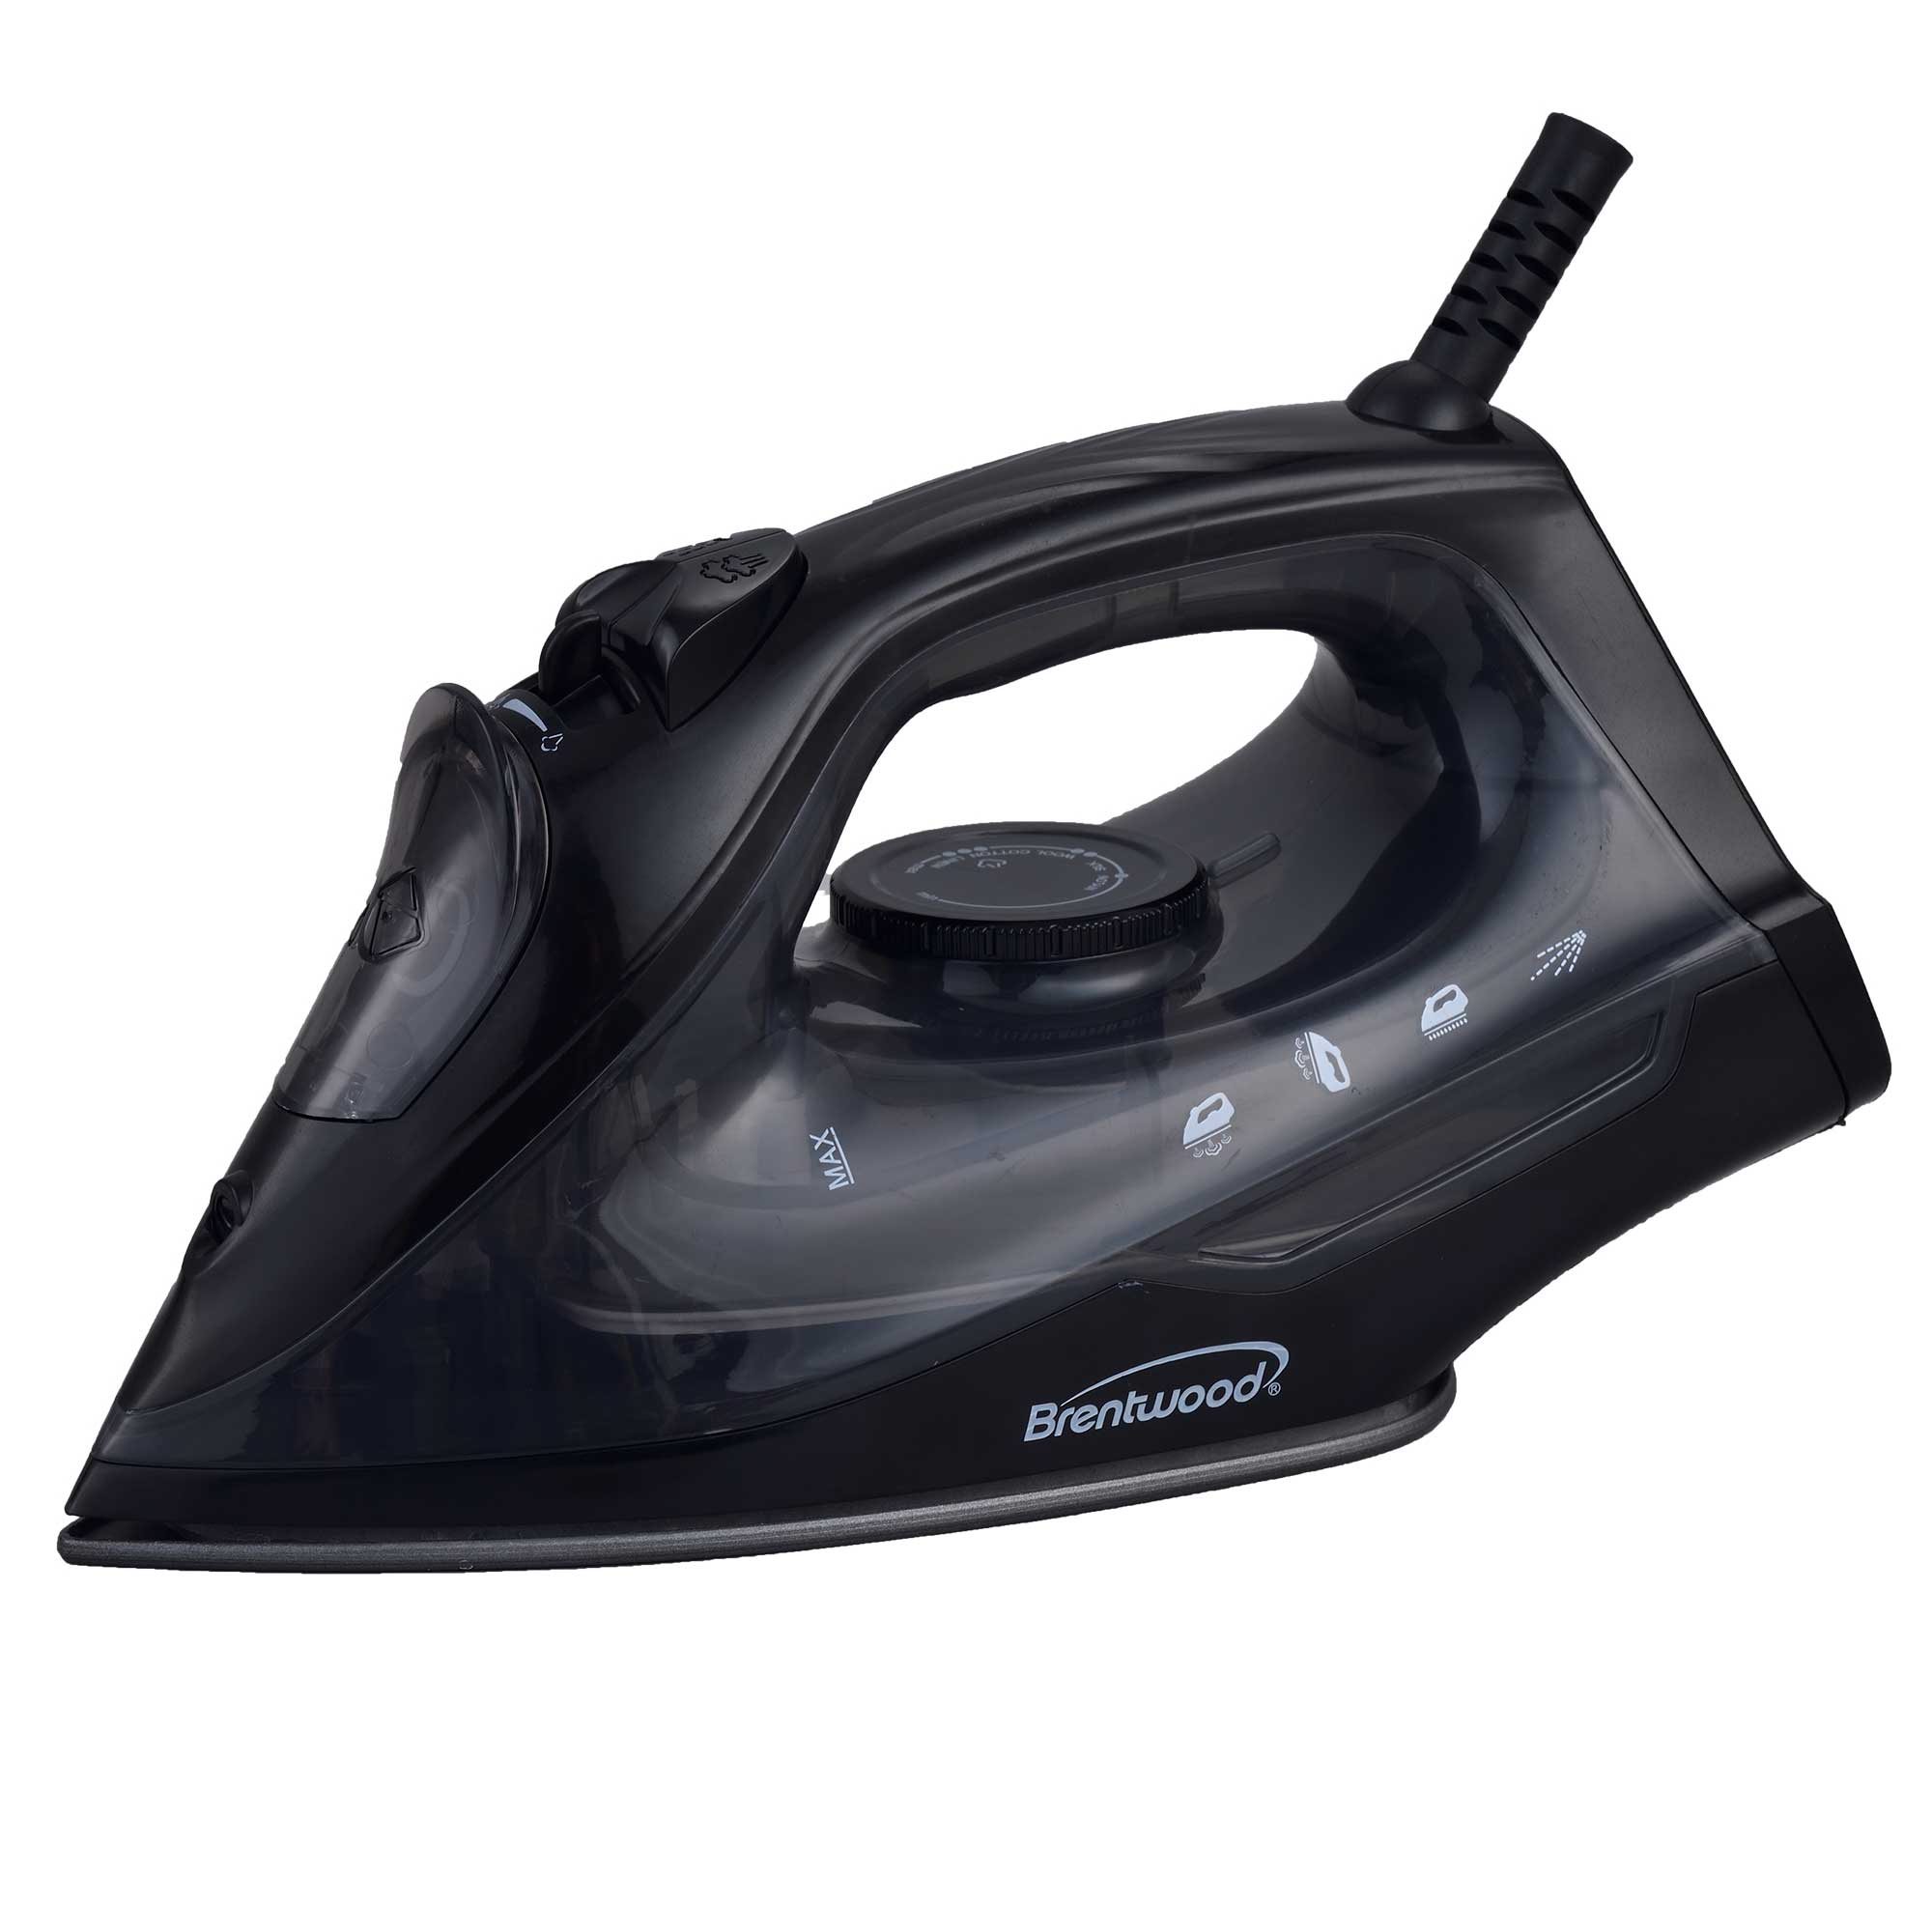 Coming Soon - Brentwood MPI-51BK 1200W Lightweight Non-Stick Steam Iron with Extra Long 8FT Cord, Black